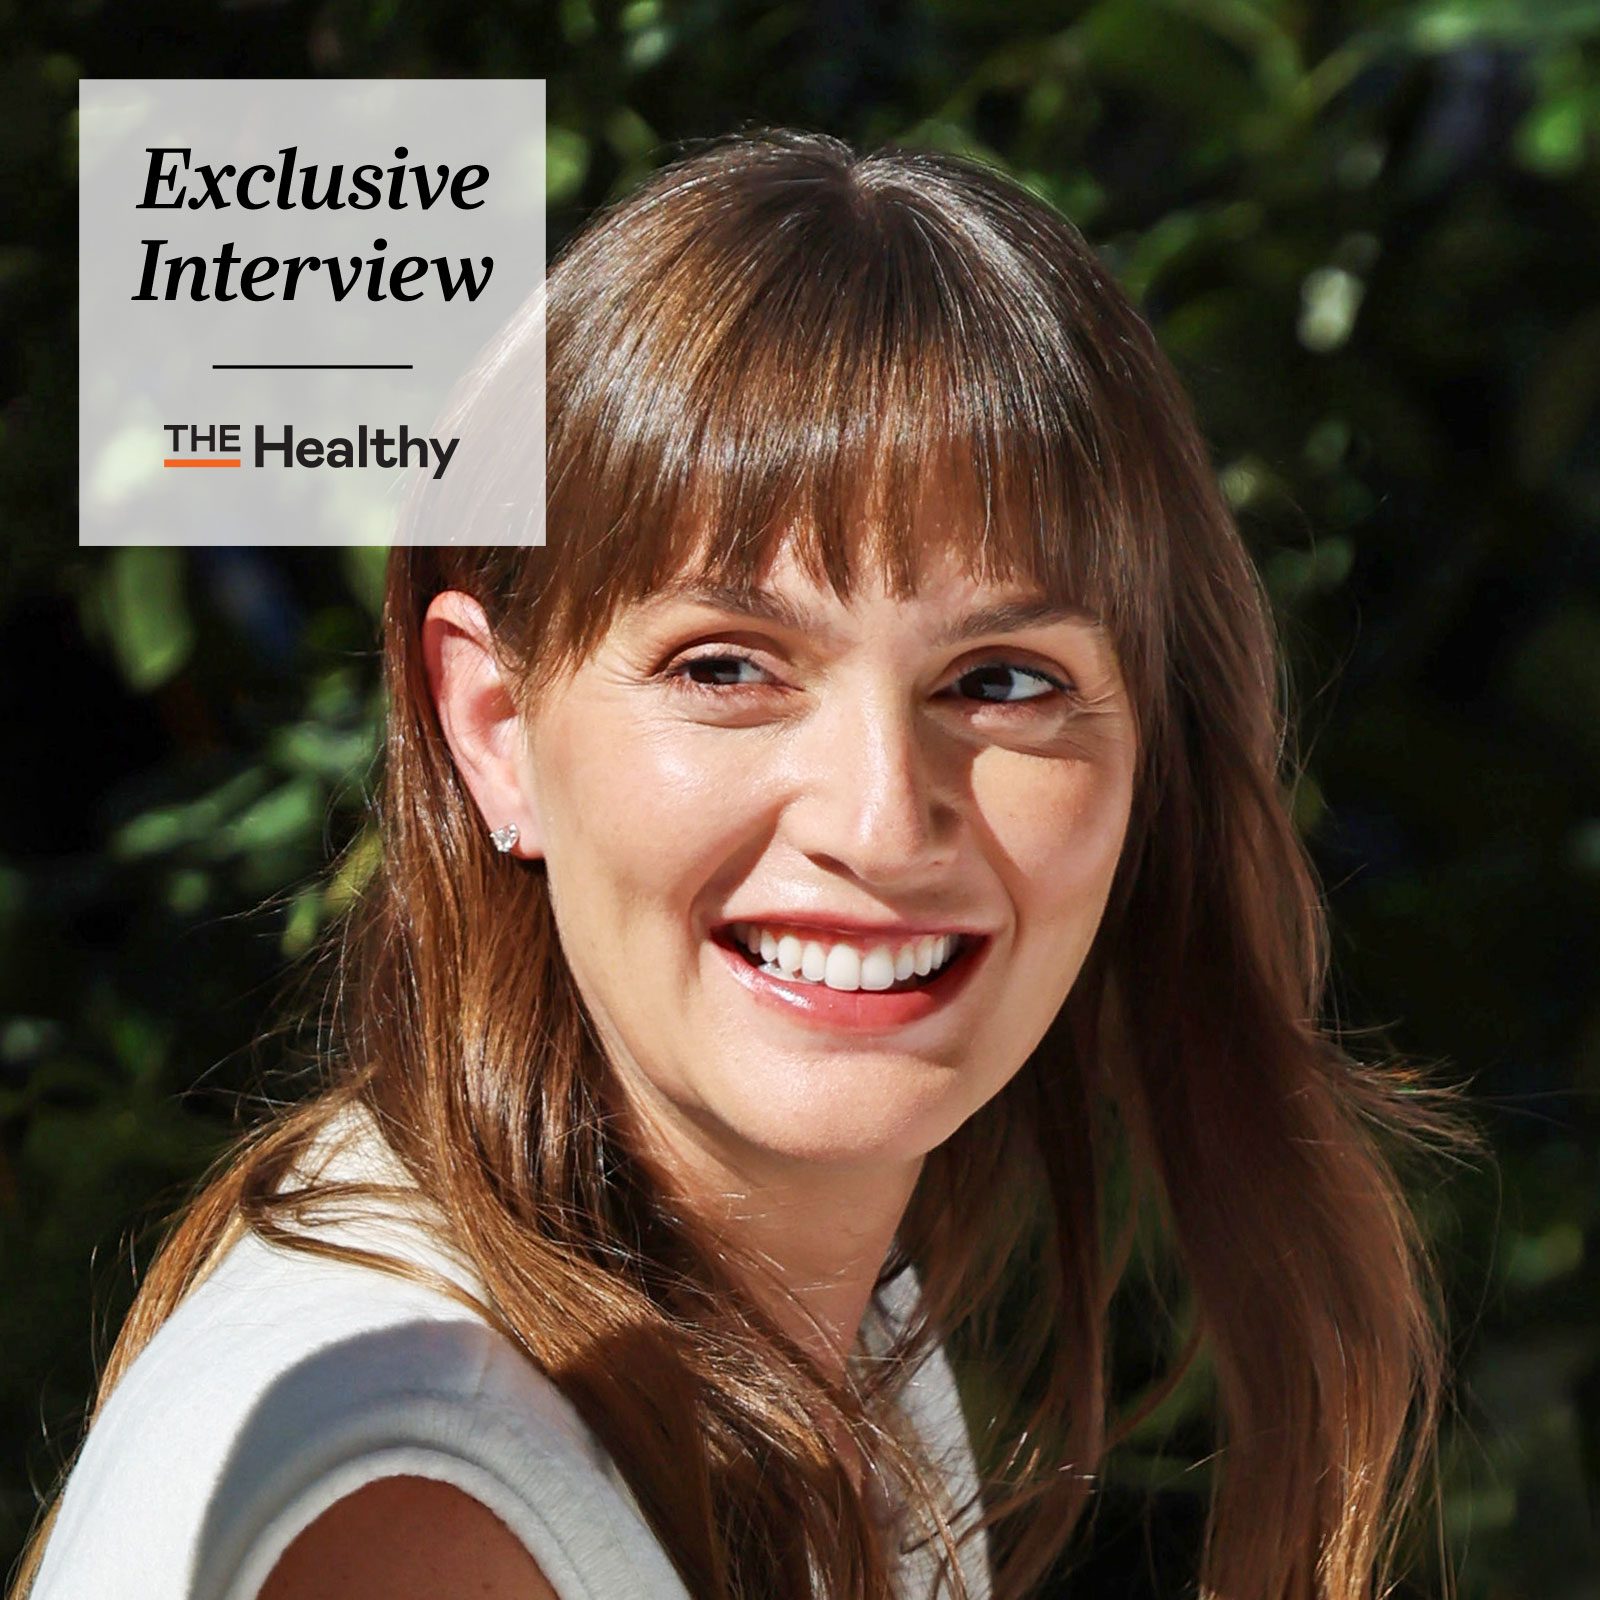 How Leighton Meester's Life Inspired Her To Fight Childhood Hunger